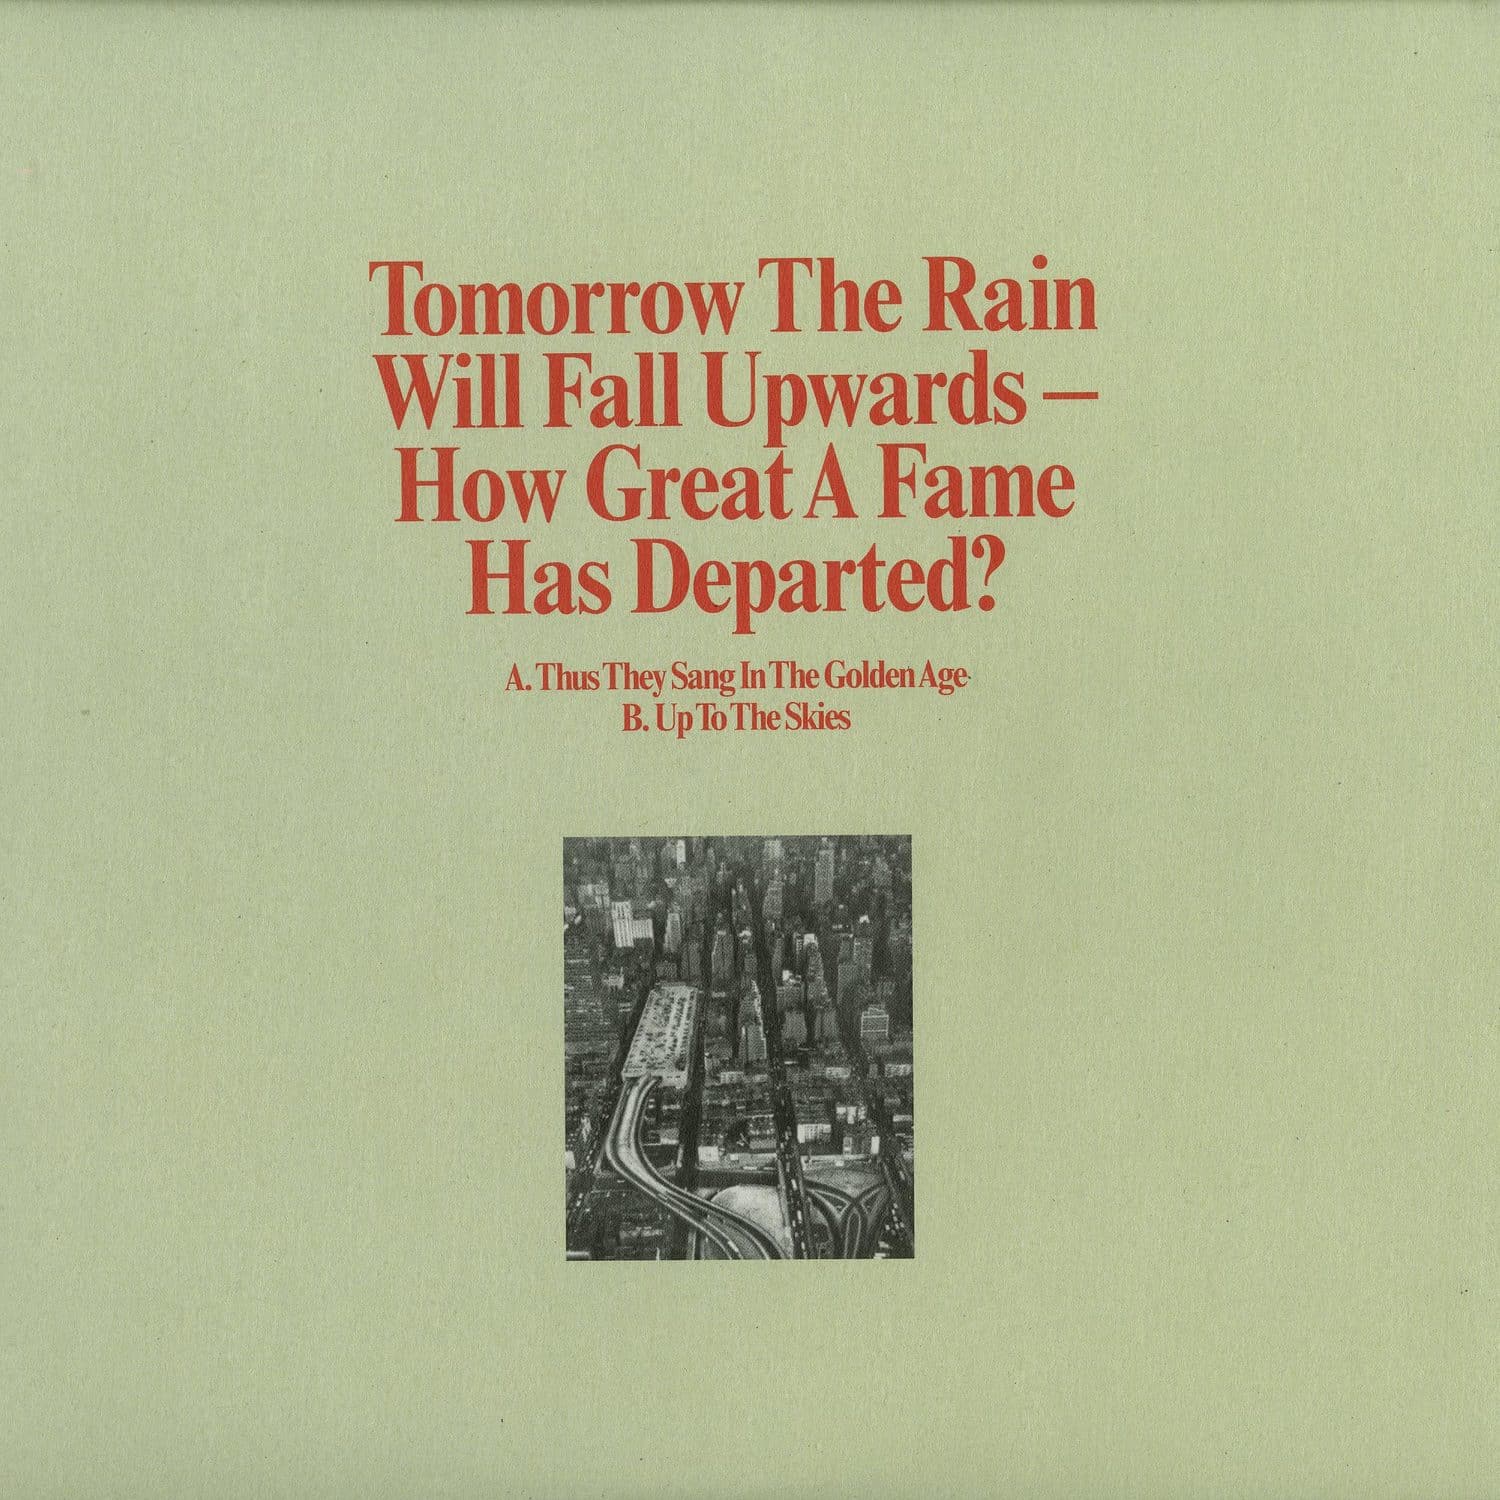 Tomorrow The Rain - HOW GREAT A FAME HAS DEPARTED? 